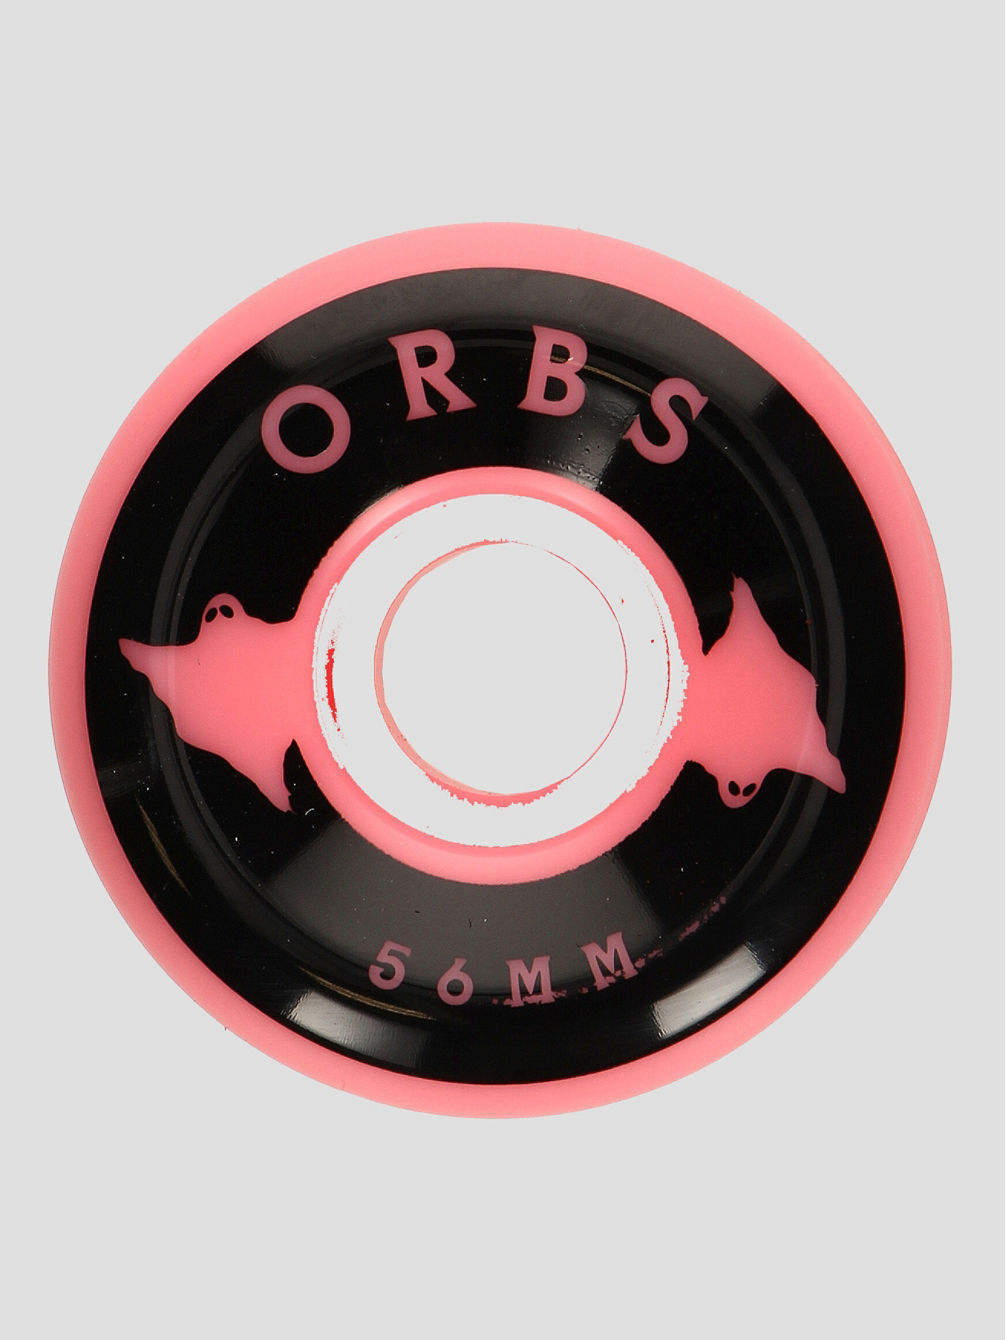 Orbs Specters - Conical - 99A 56mm Roues